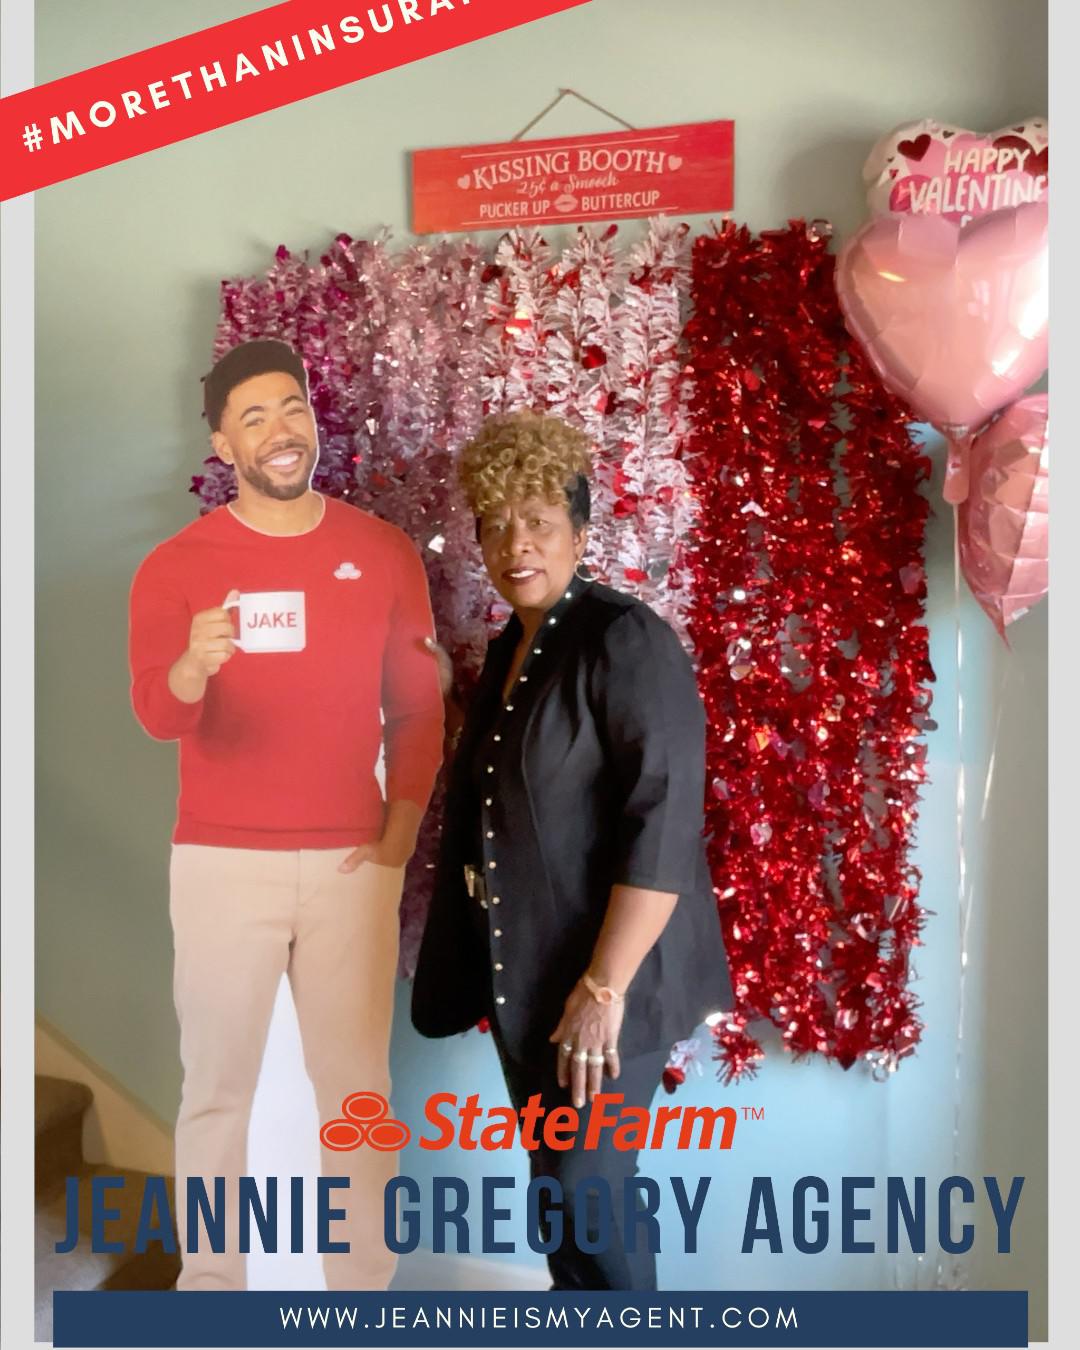 Thank you to everyone that stopped by to get their picture with Jake. We had fun with it. Even though Valentine's Day has passed - the opportunity to #InsureYourLove with life insurance hasn't! Contact us today to see how affordable it is to insure your love. ❤